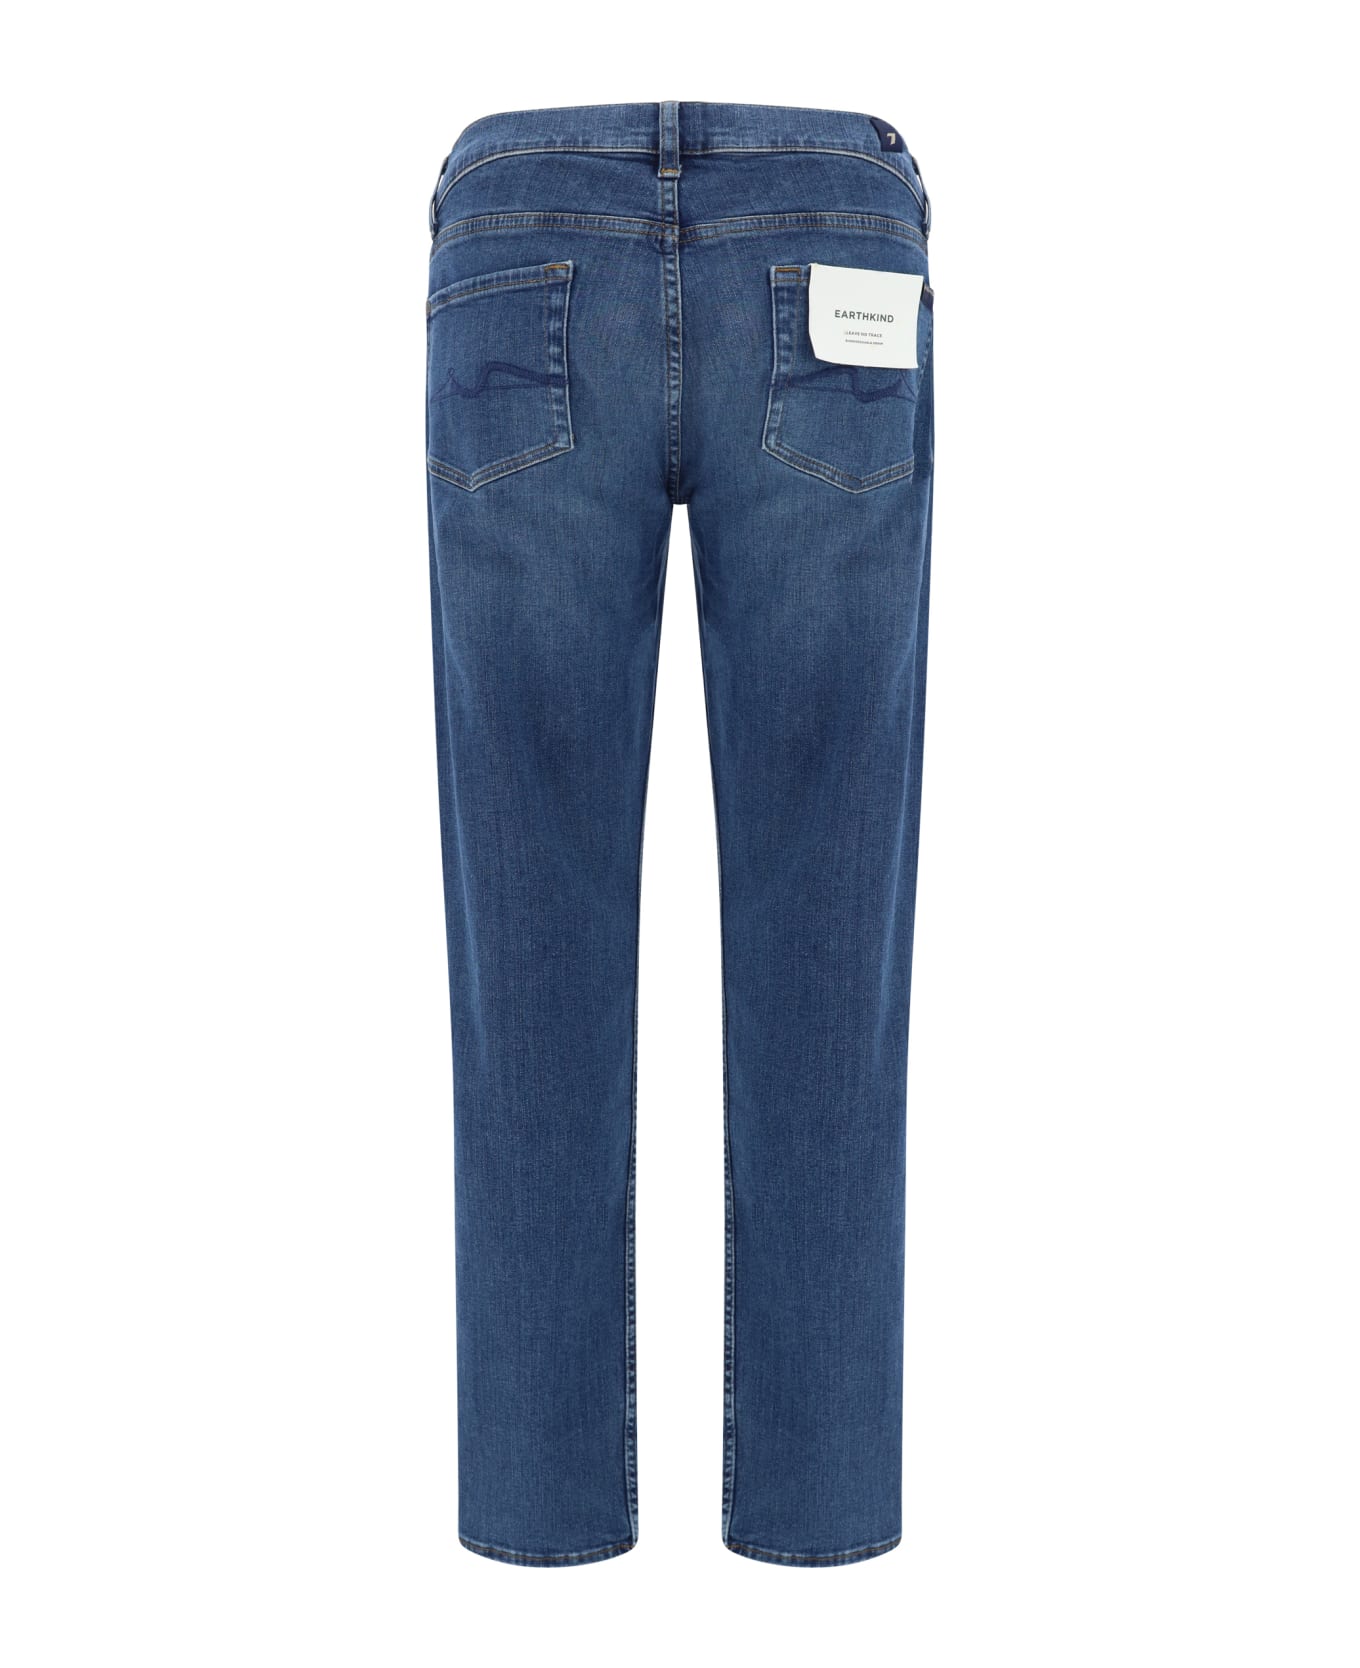 7 For All Mankind Jeans - Mid Blue